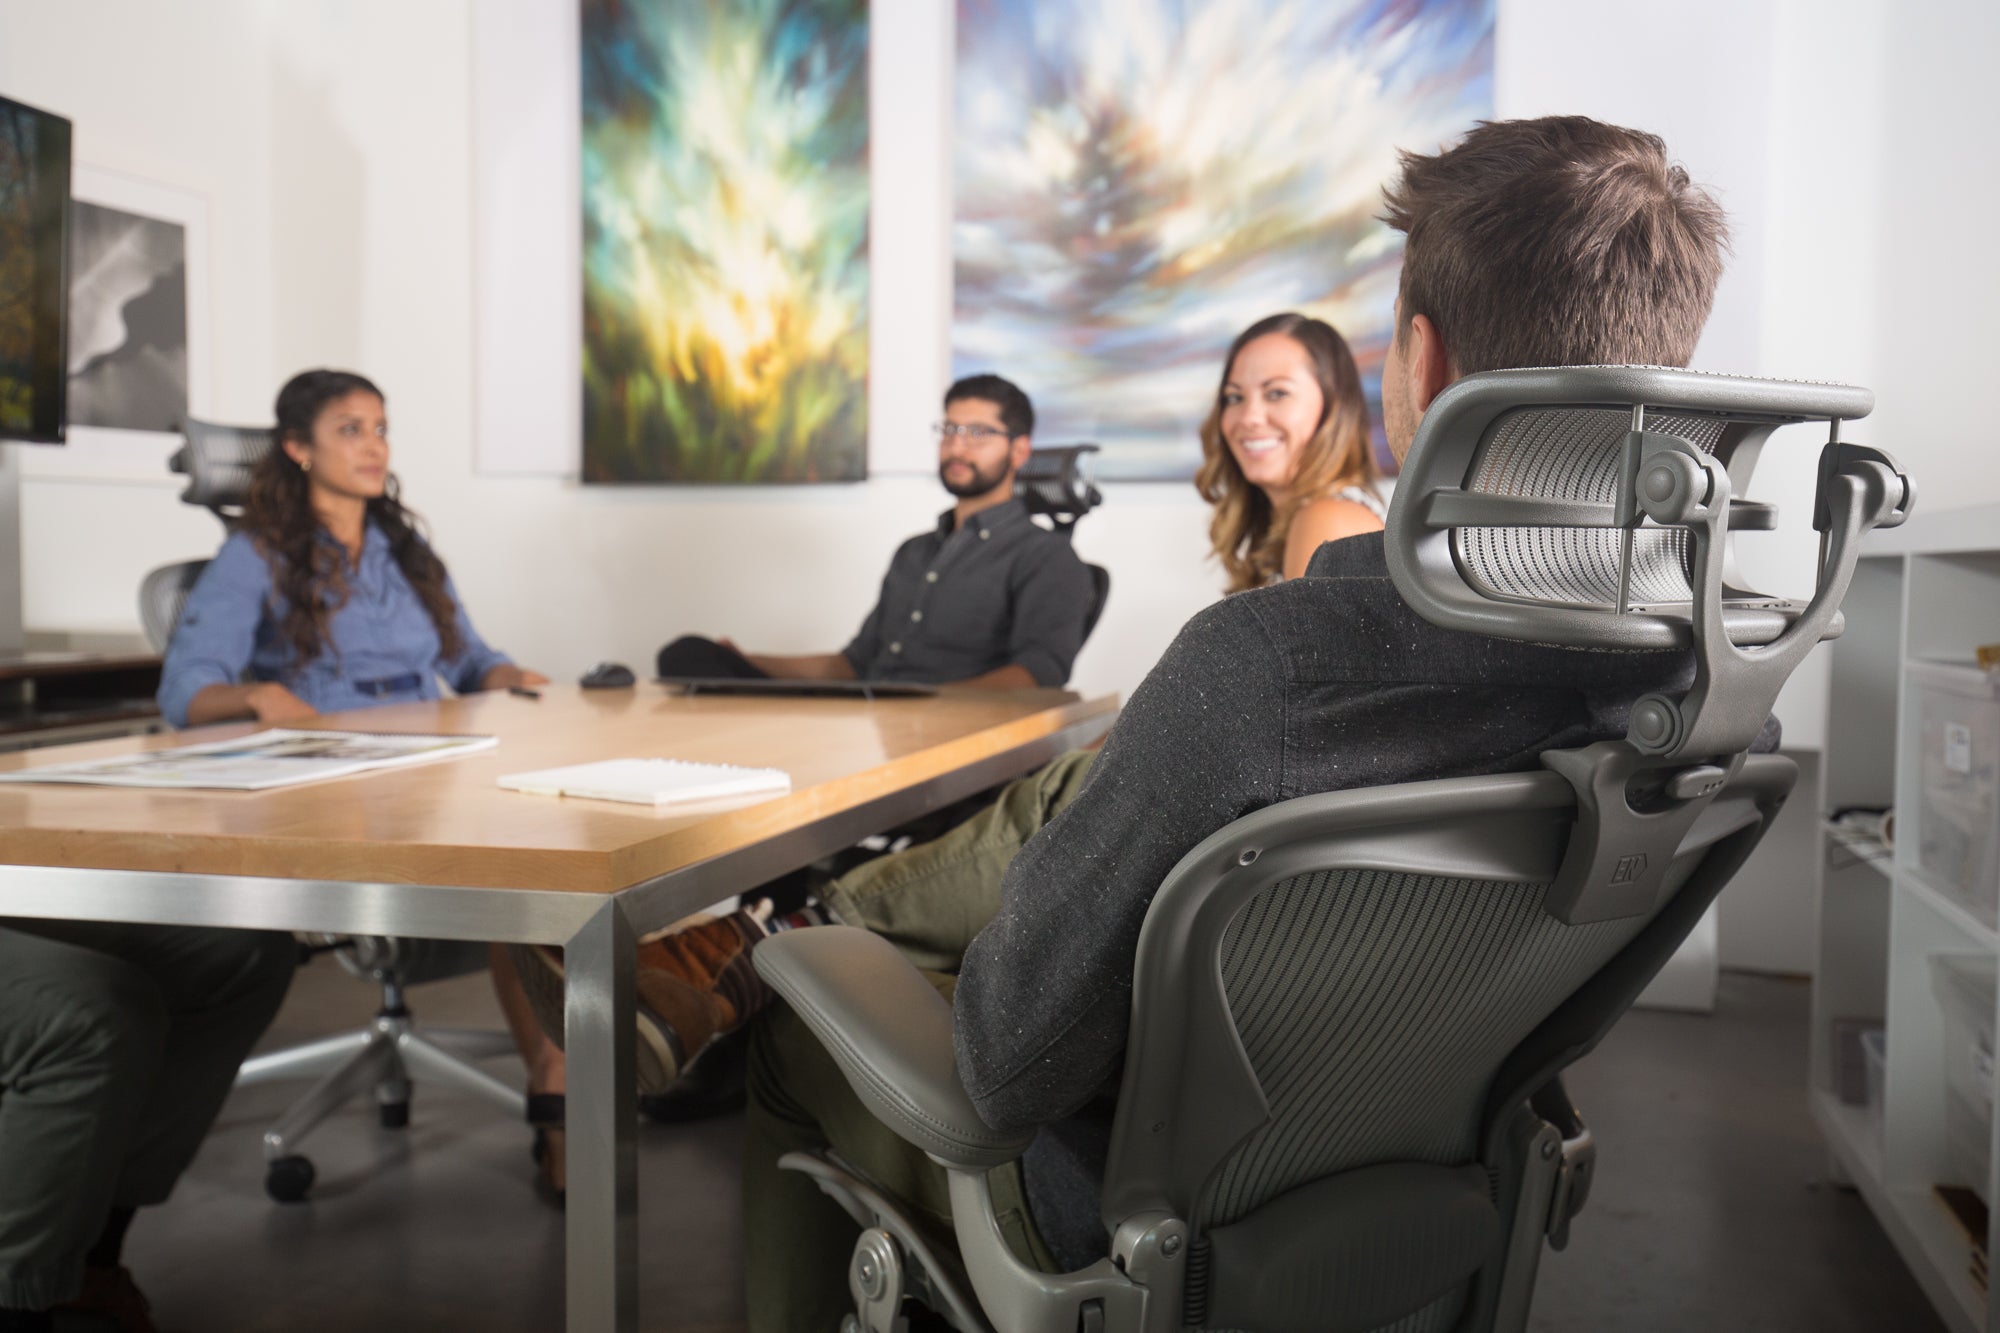 What You Should Look For When Choosing An Office Chair?